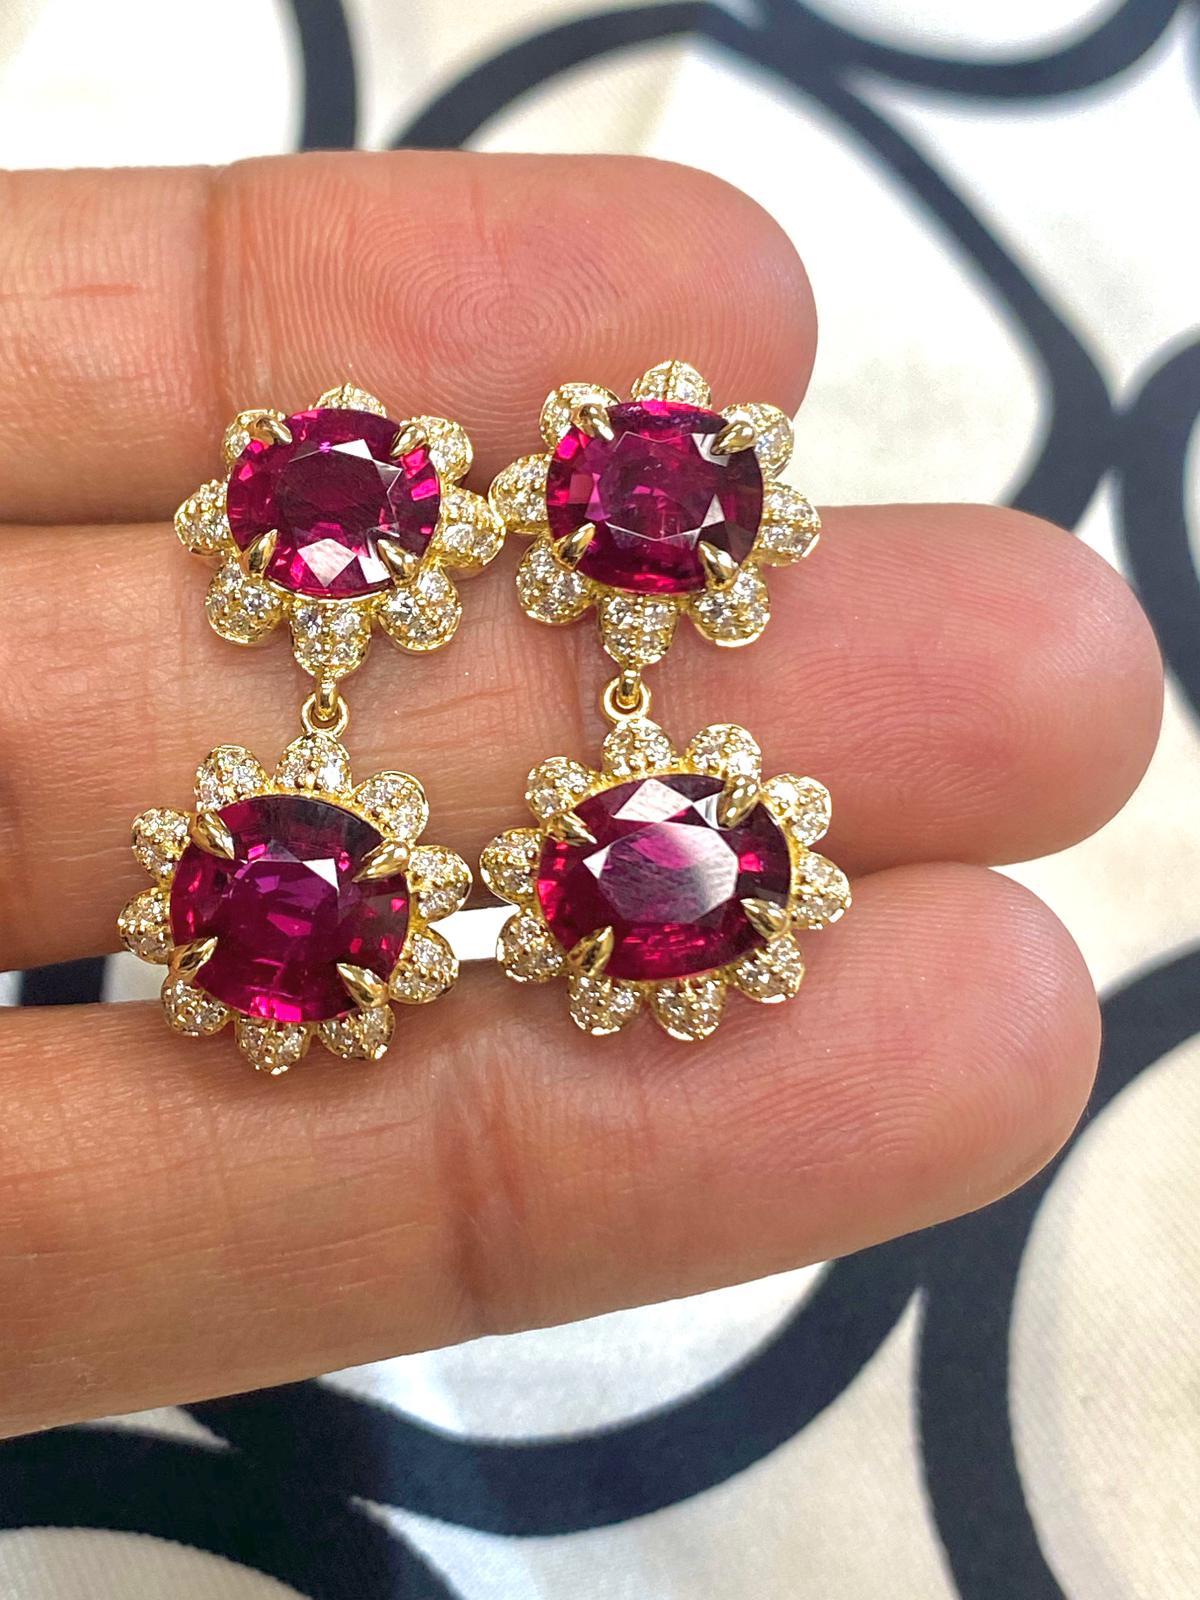 Faceted Oval Twin Rubellite Earrings with Diamonds And Lever Back in 18K Yellow Gold, from 'G-One' Collection

Approx. Stone Wt: 8.21 Carats (Rubellite) 

Diamonds: G-H / VS, Approx. Wt: 0.97 Carats 